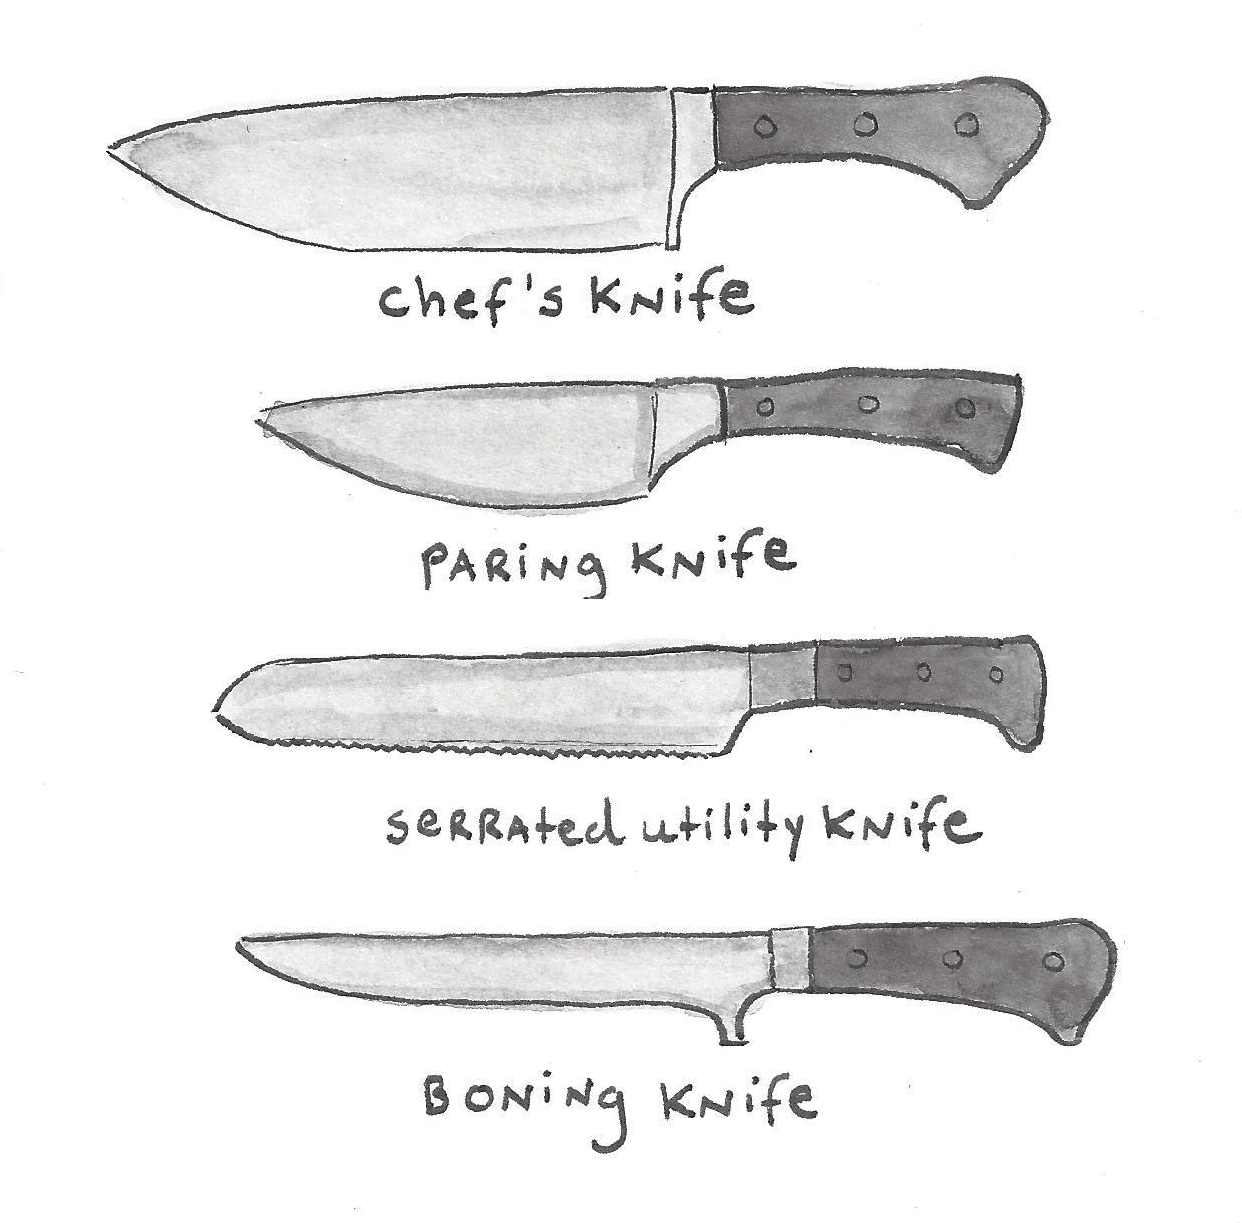 opskrift afhængige Problemer Different Types of Knives: An Illustrated Guide | Craftsy | www.craftsy.com